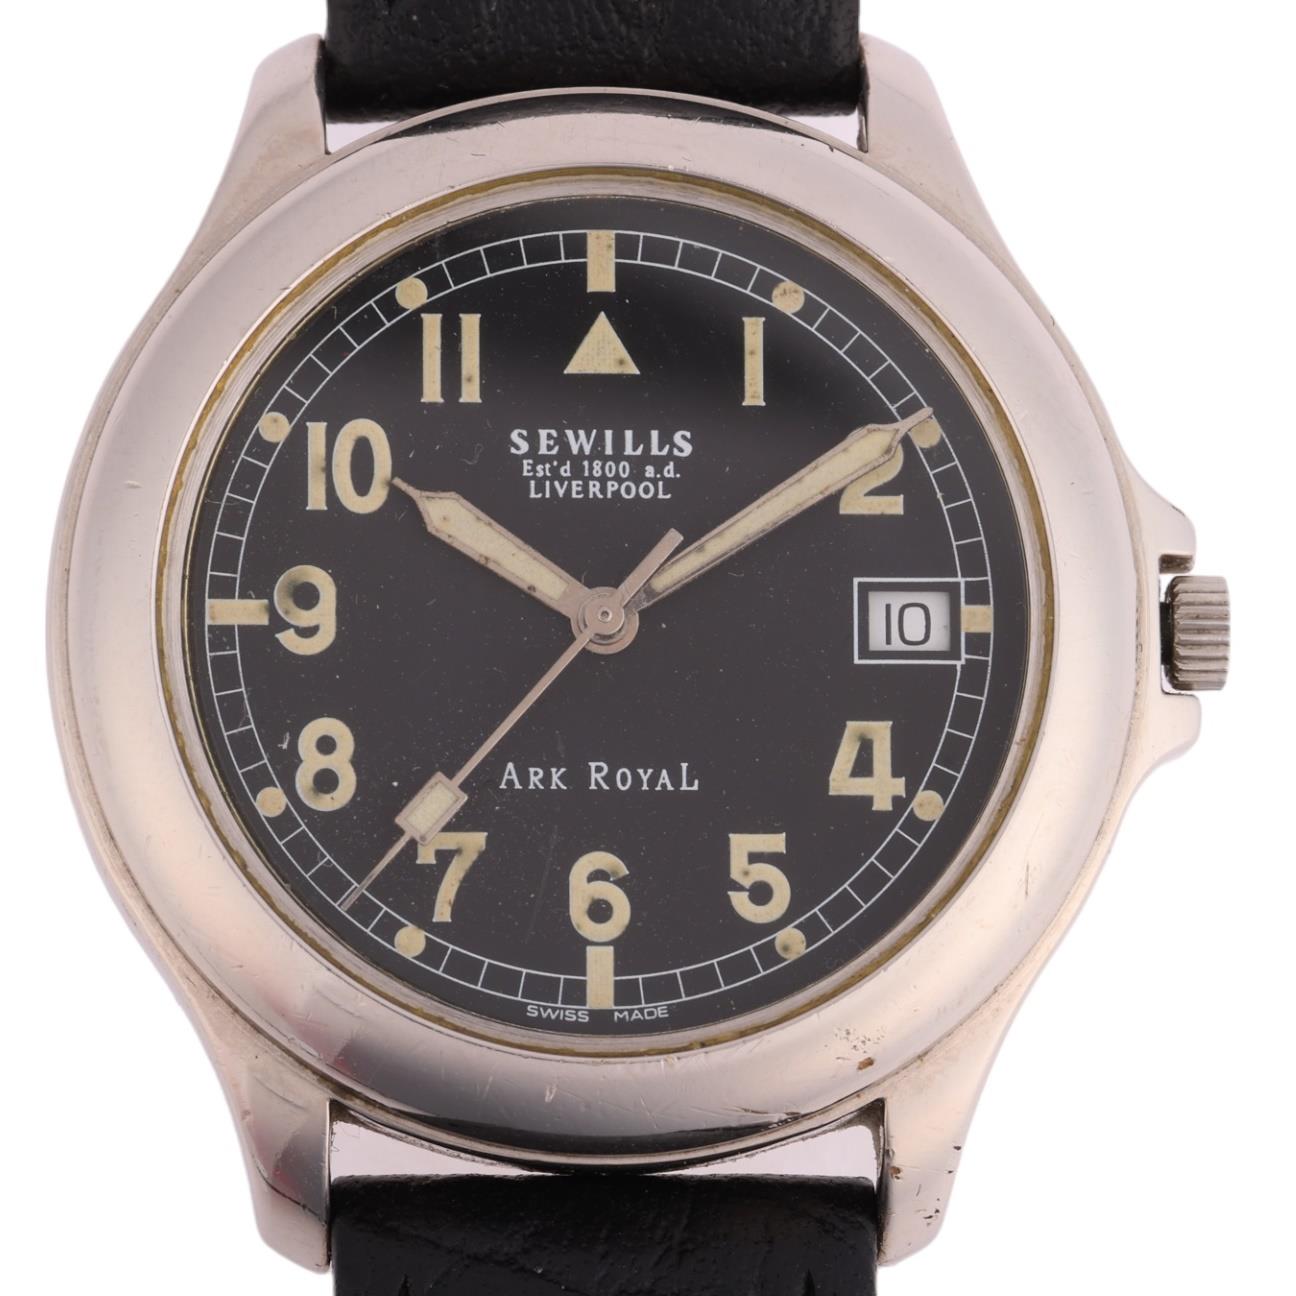 SEWILLS - a stainless steel Ark Royal military style automatic wristwatch, mat black dial with